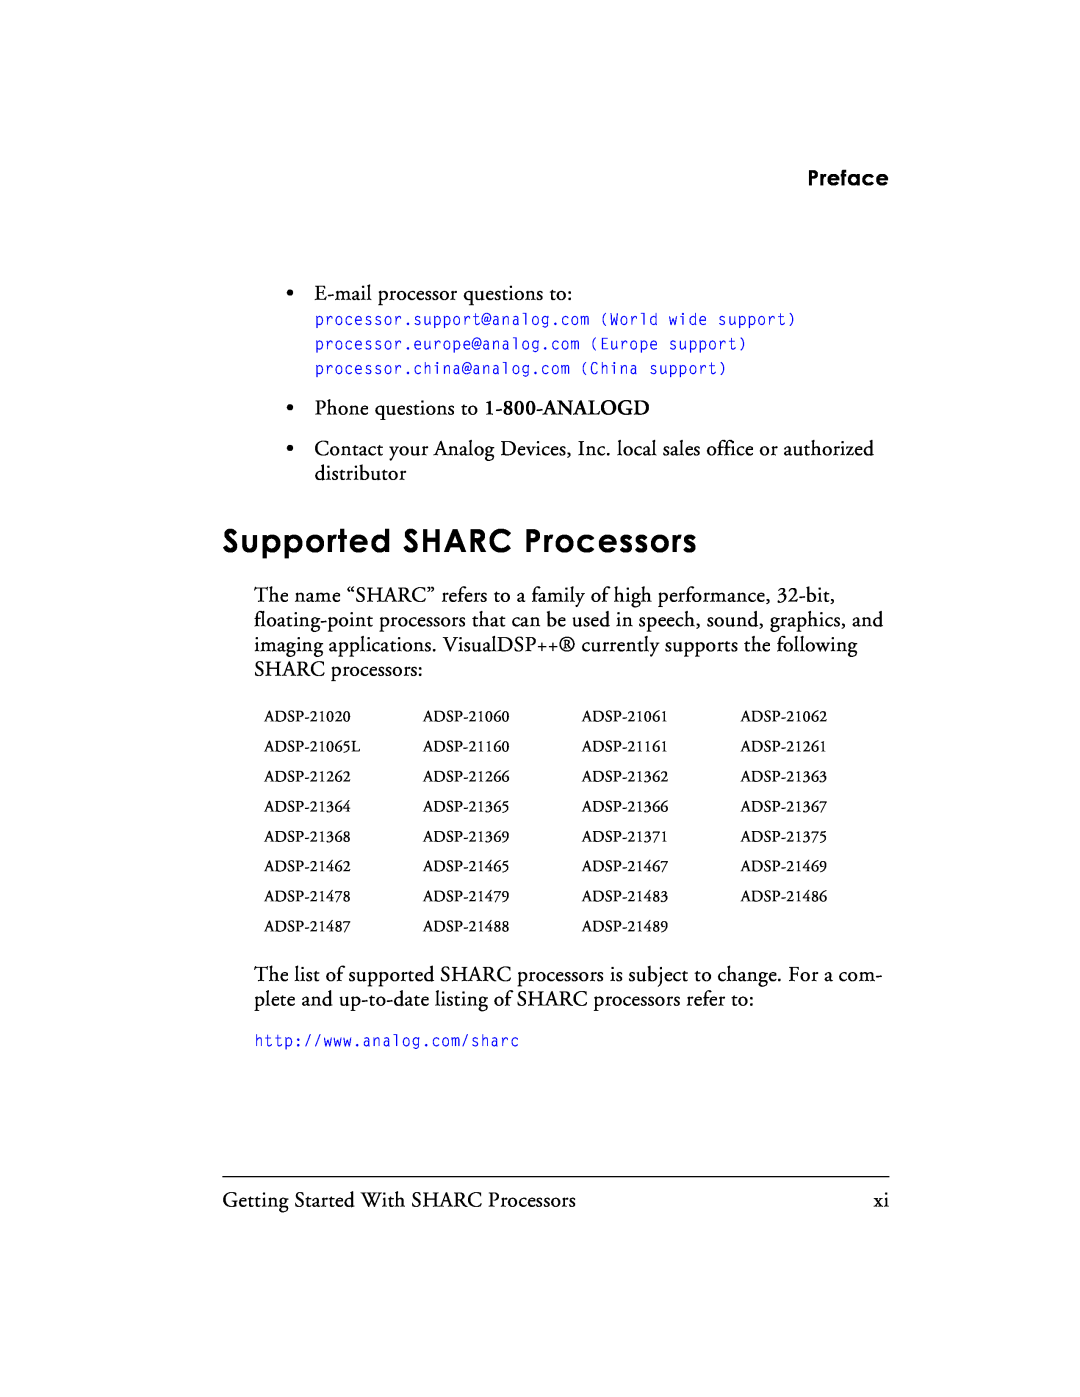 Analog Devices 82-003536-01 manual Supported SHARC Processors, Preface 